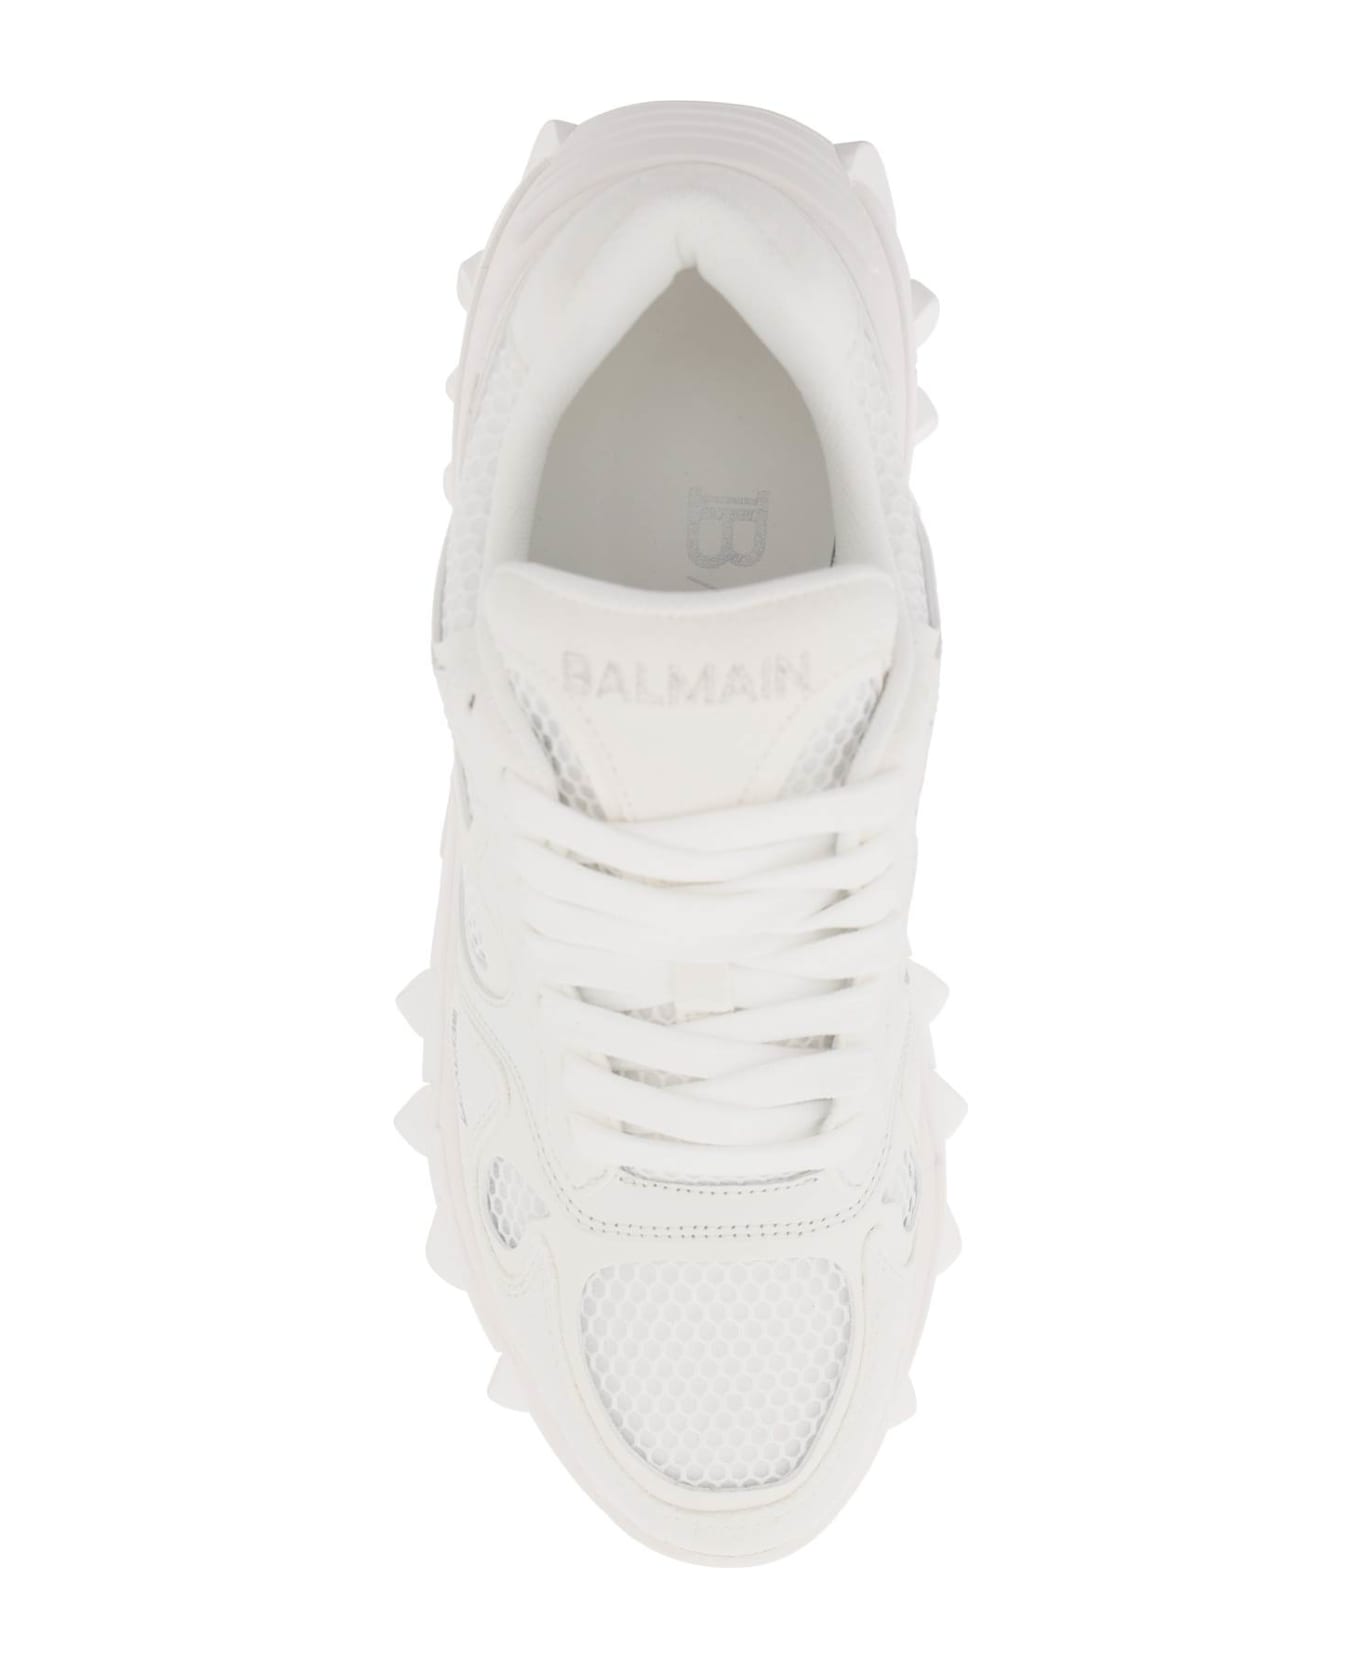 Balmain B-east Leather And Mesh Sneakers - BLANC OPTIQUE (White) スニーカー